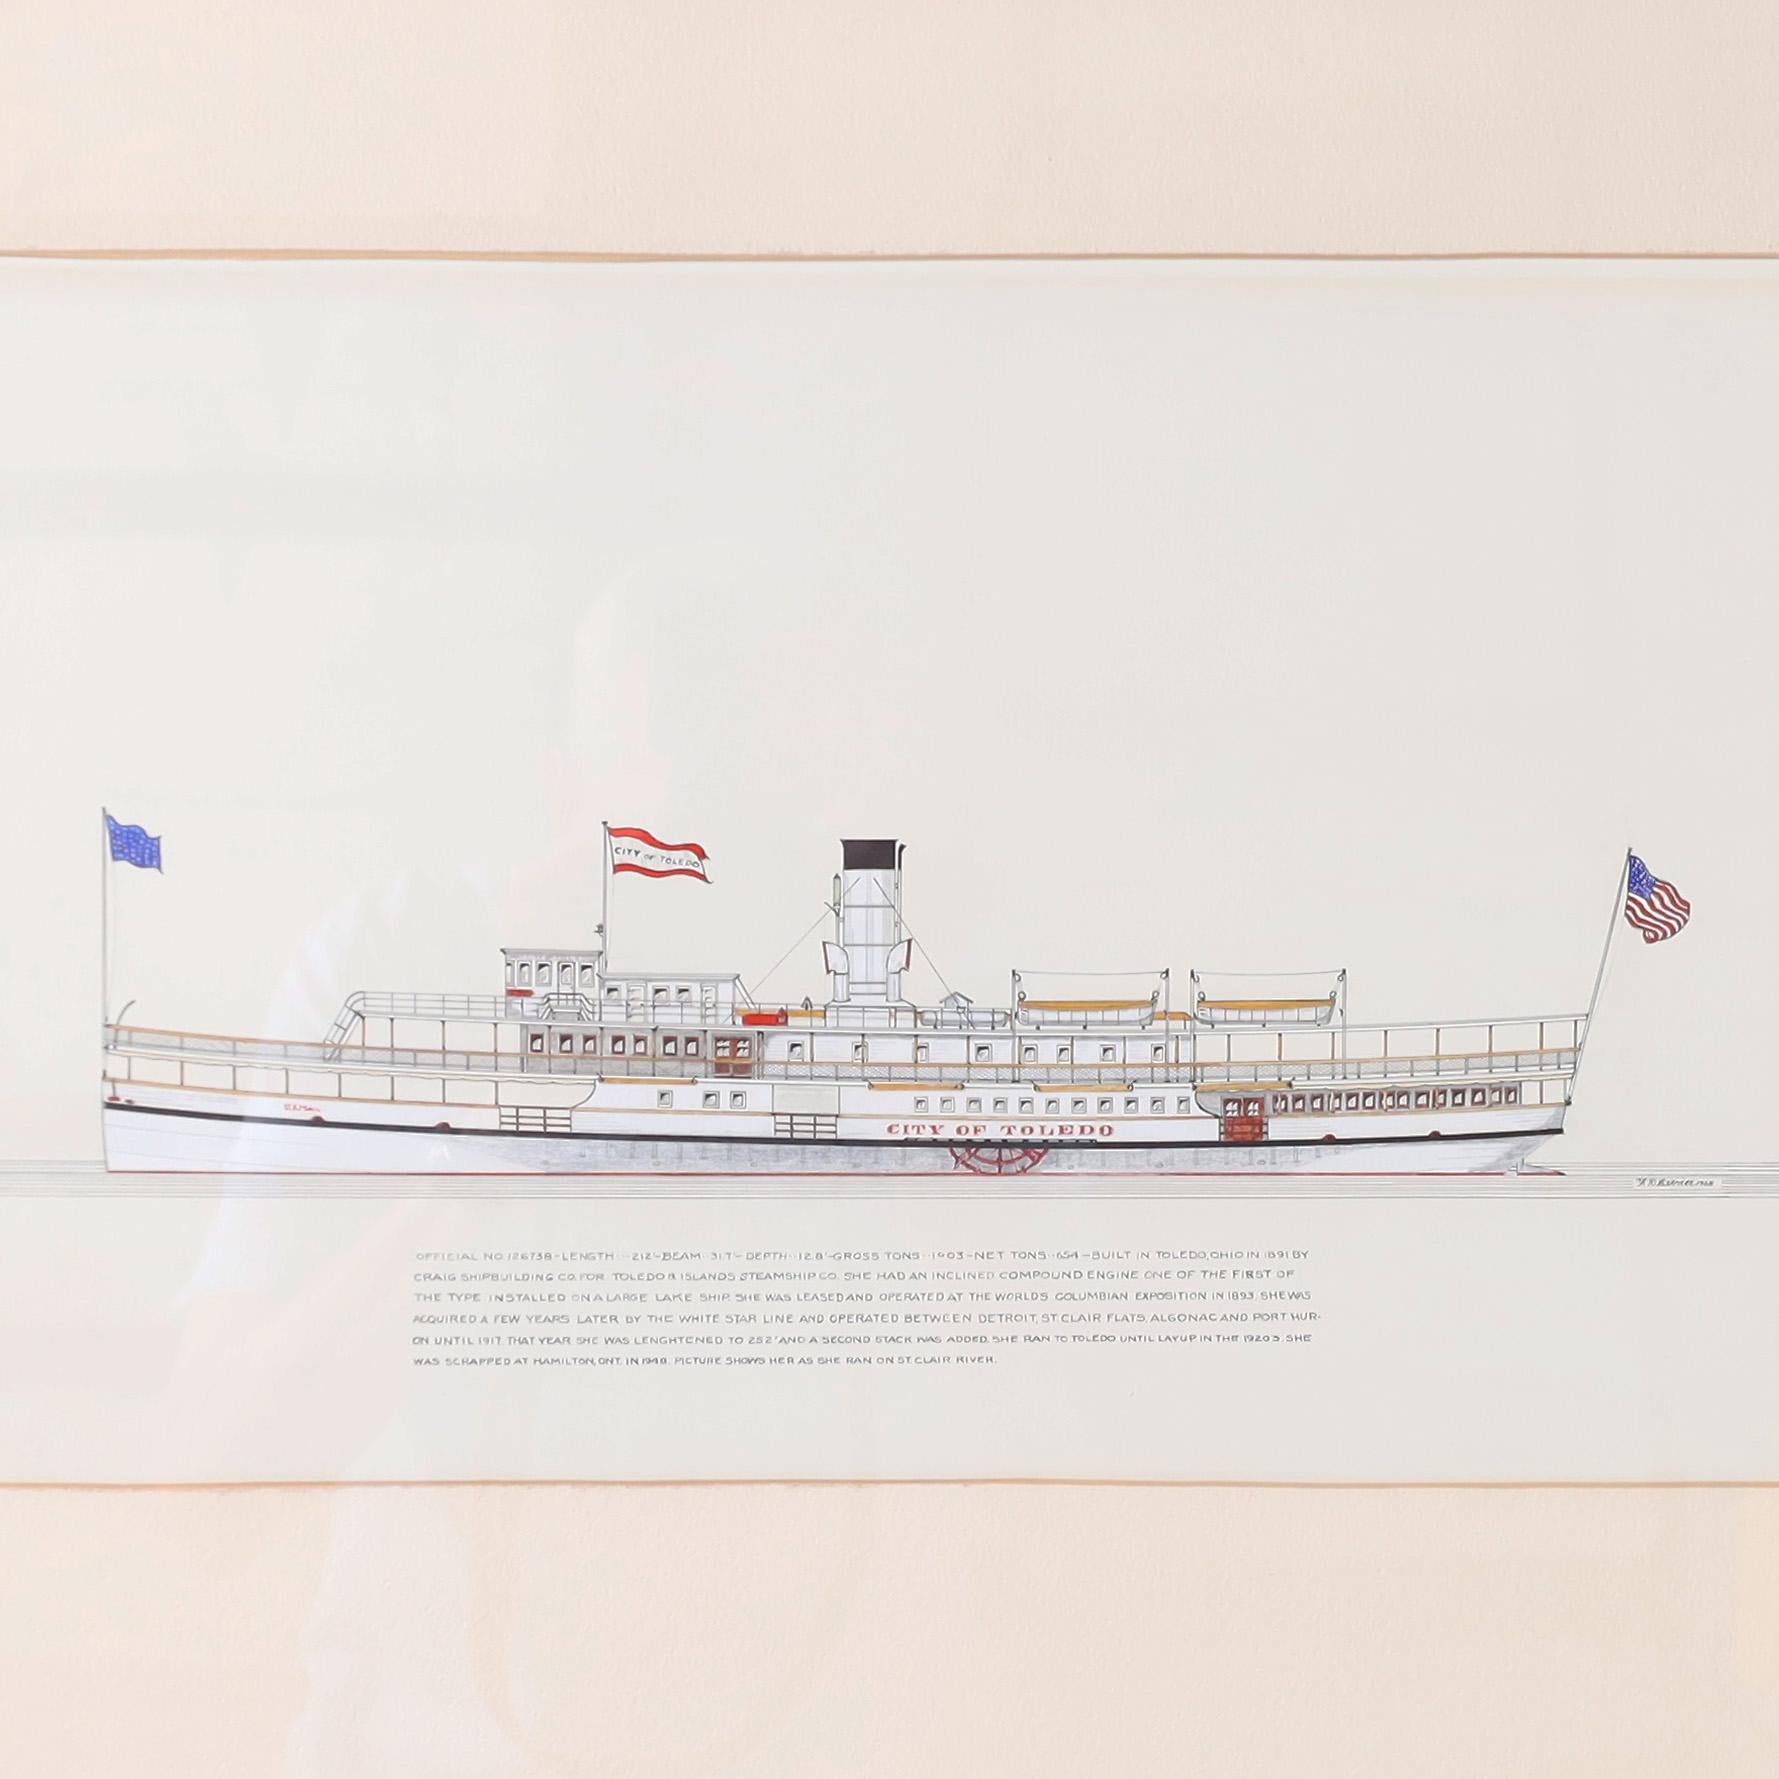 Ink and gouache painting on paper of a 19th century Great Lakes steamship executed in precise draftsman style and signed by noted American artist Frank Crevier, framed and presented under glass. As seen in the last photos of the listing, this is one